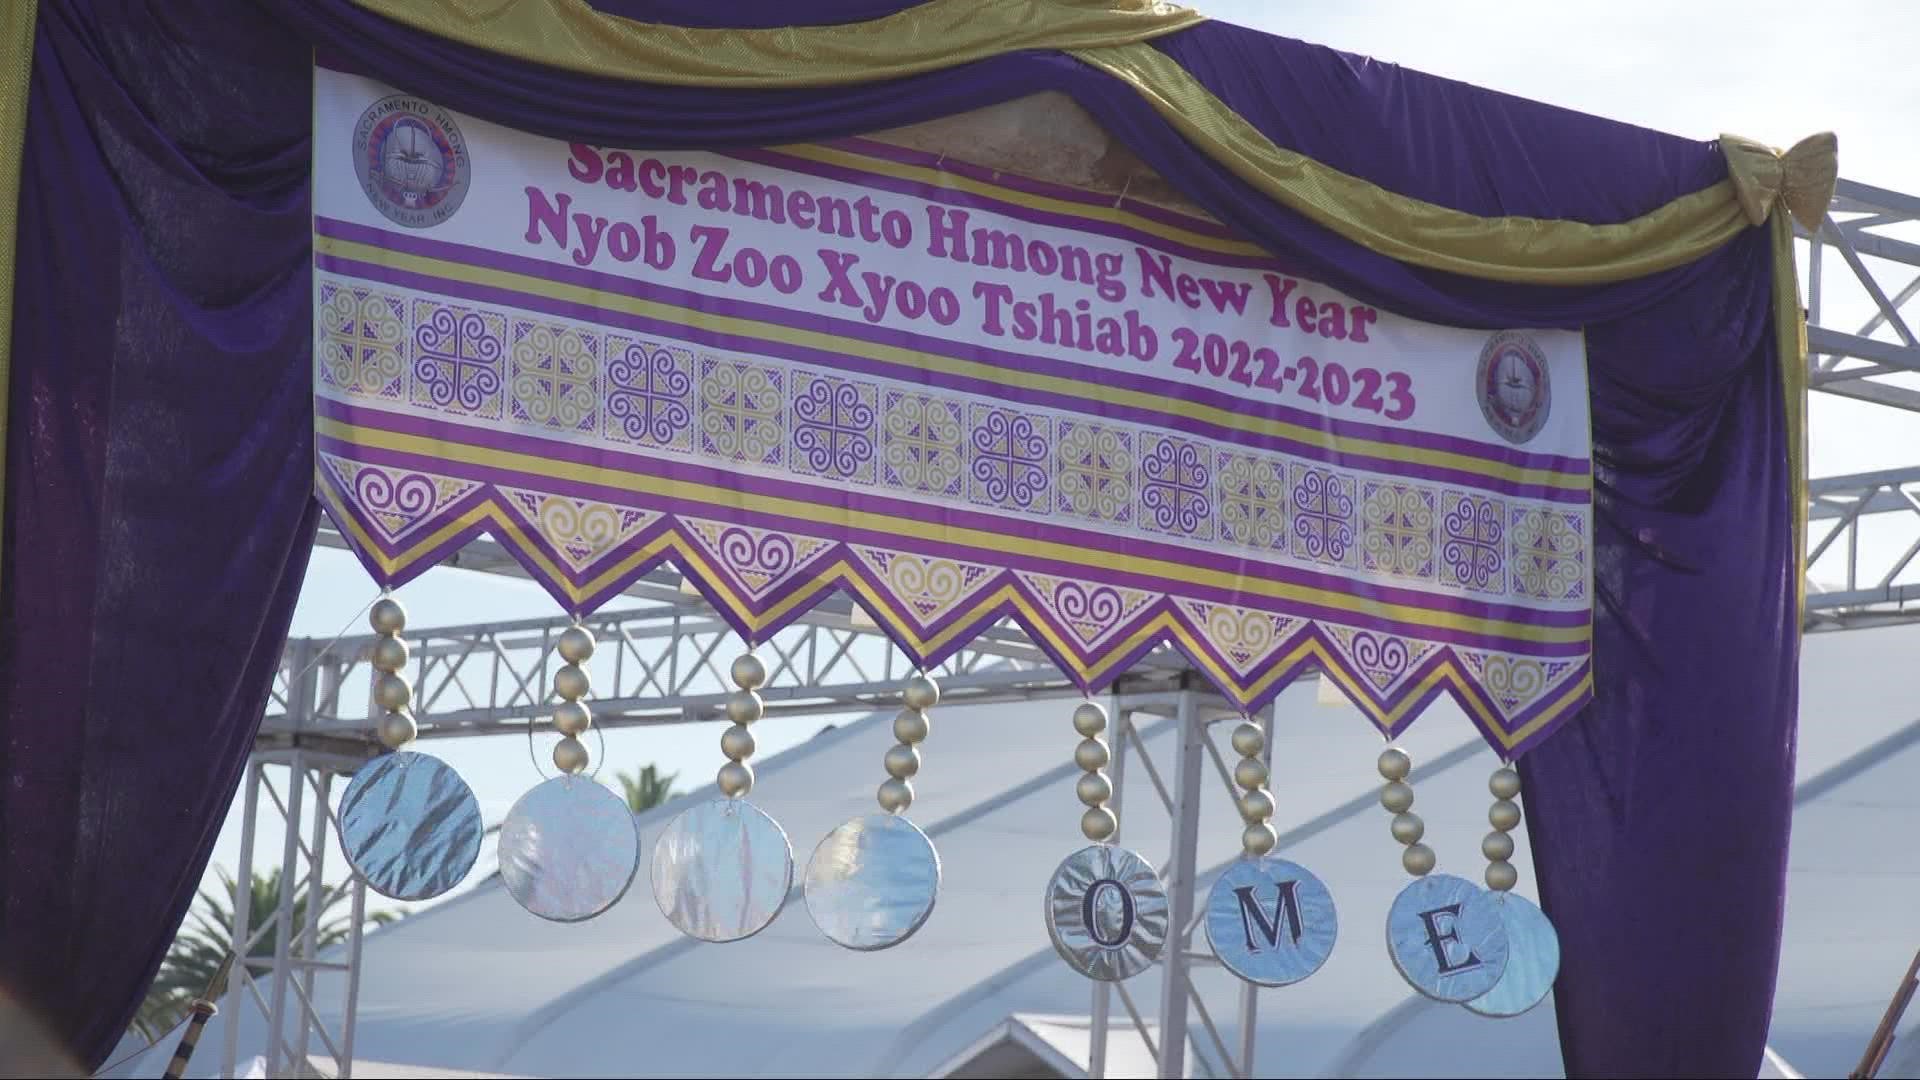 Every year since 2005, Sacramento Hmong Inc. has put on what are now some of the largest Hmong New Year celebrations in the nation.